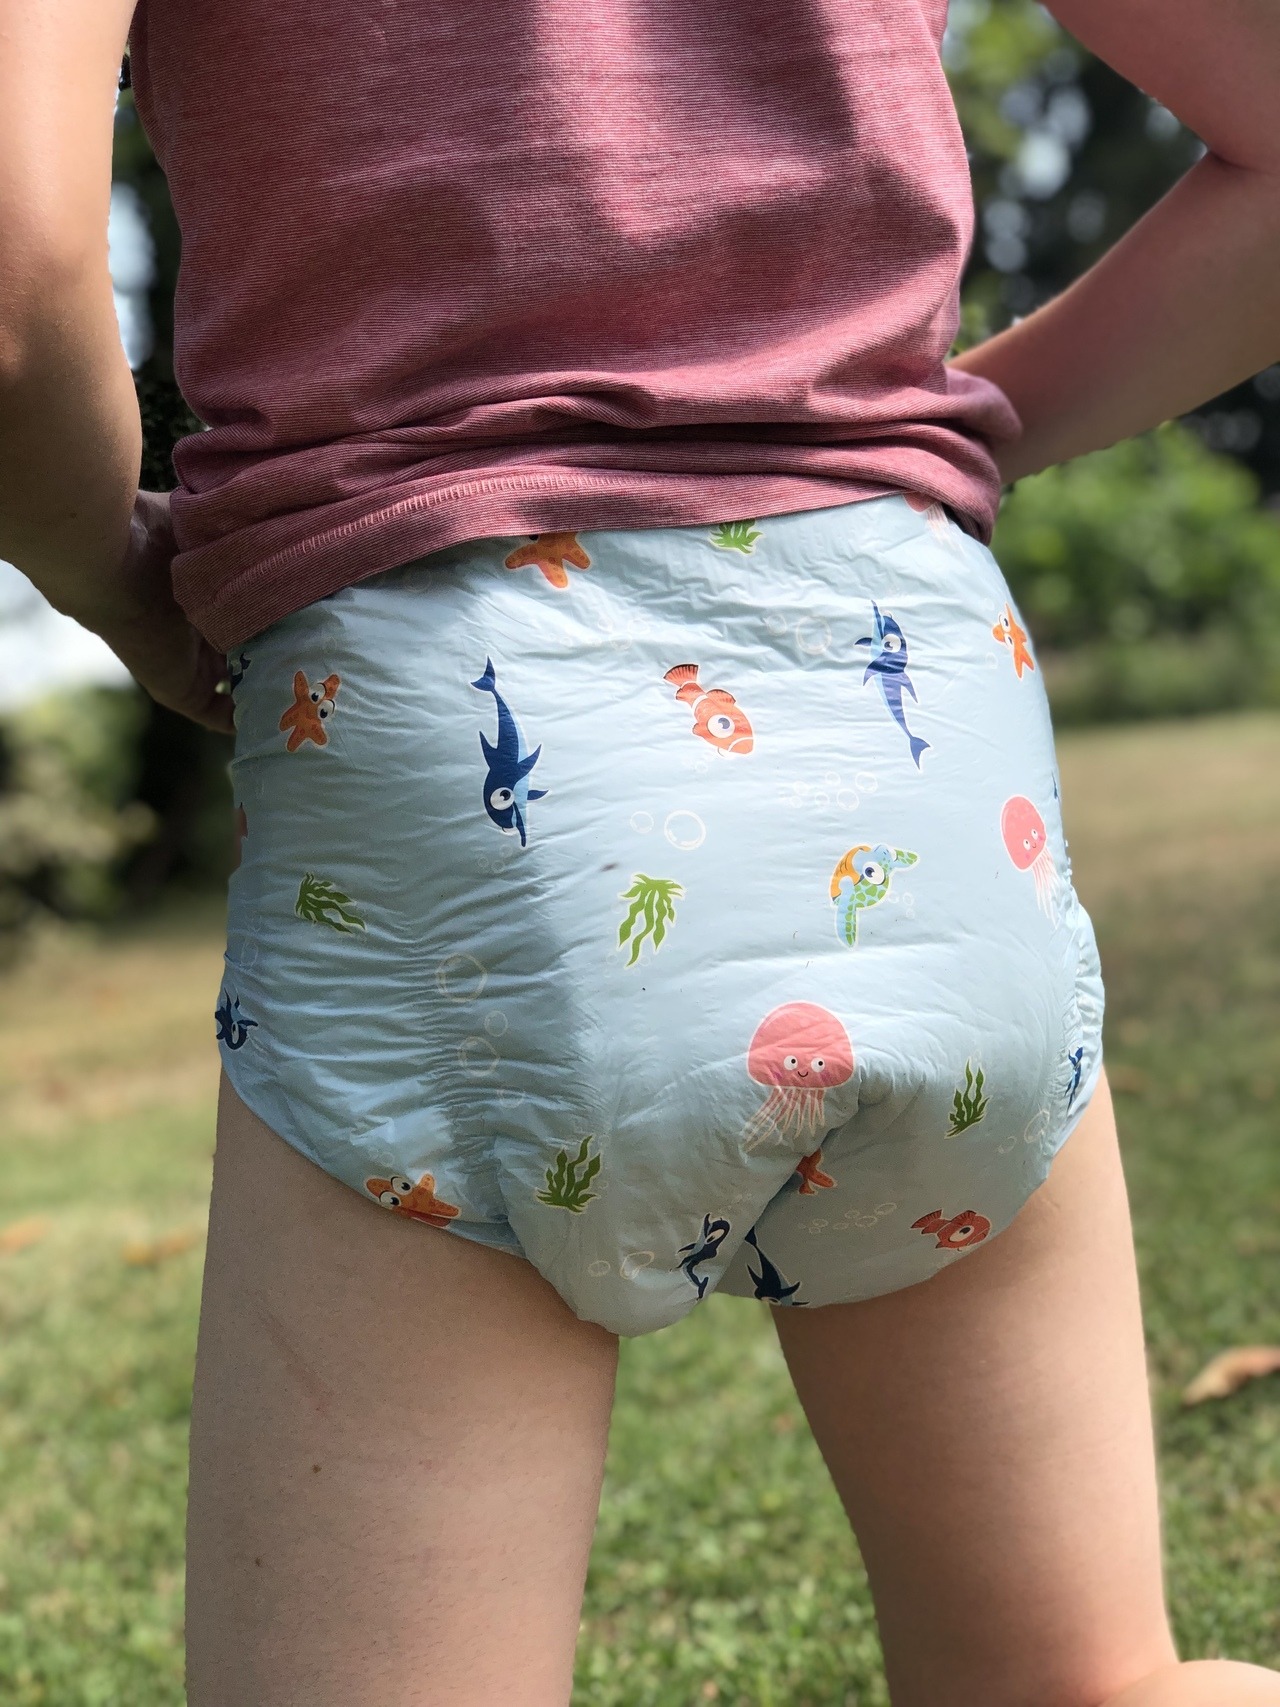 diaper-minister — diaper-heroes: Discover our new Forsite ...